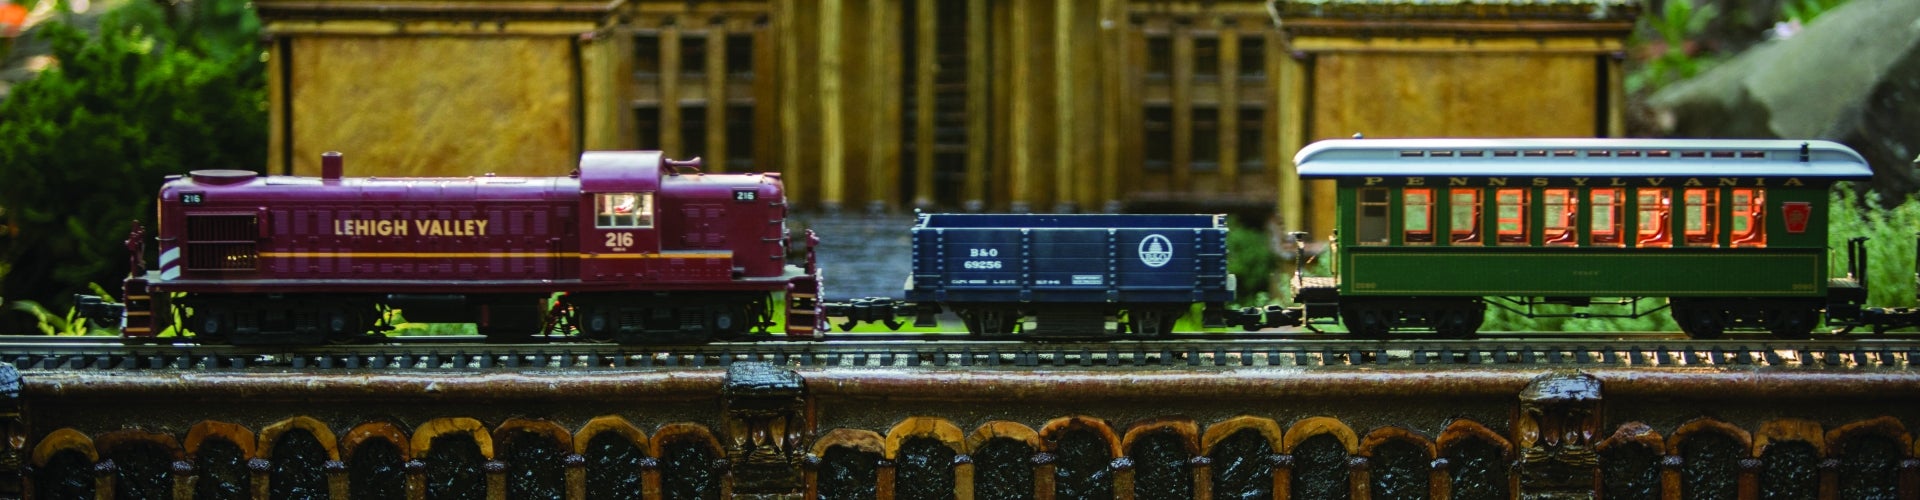 The first three cars of a model train.